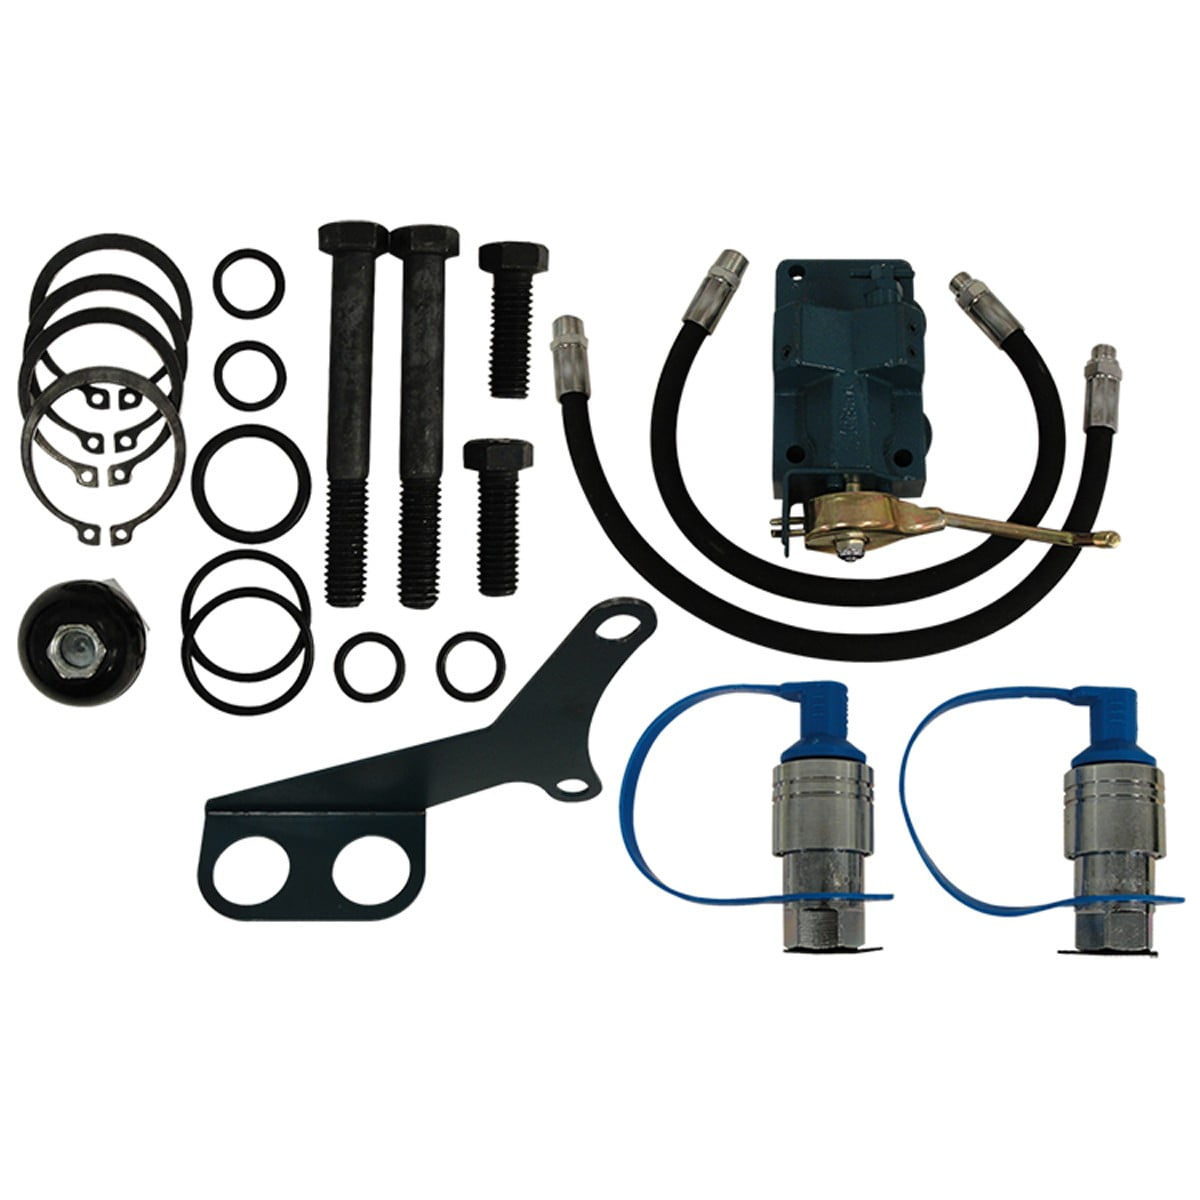 3 Cyl Ford 2000 4000 Tractor Ignition Tune Up Kit & 12V Coil 3000 